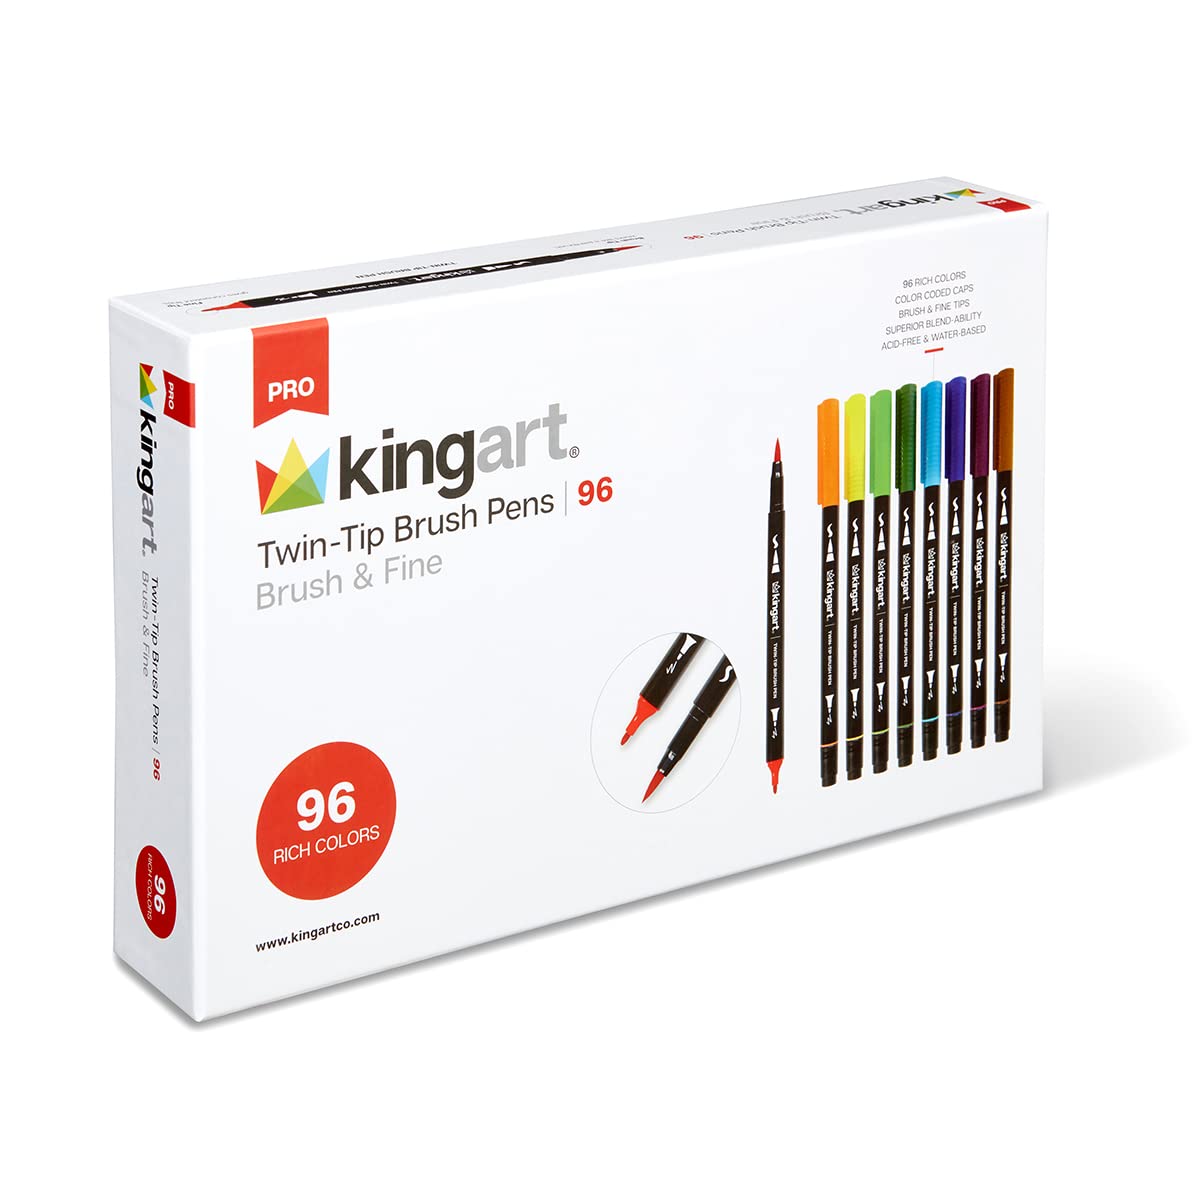 KINGART PRO Dual Twin-Tip Brush Pens, Set of 96 Unique  Vivid Colors,  Watercolor Markers with Flexible Nylon Brush Tips, Professional Watercolor  Pens for Painting, Drawing